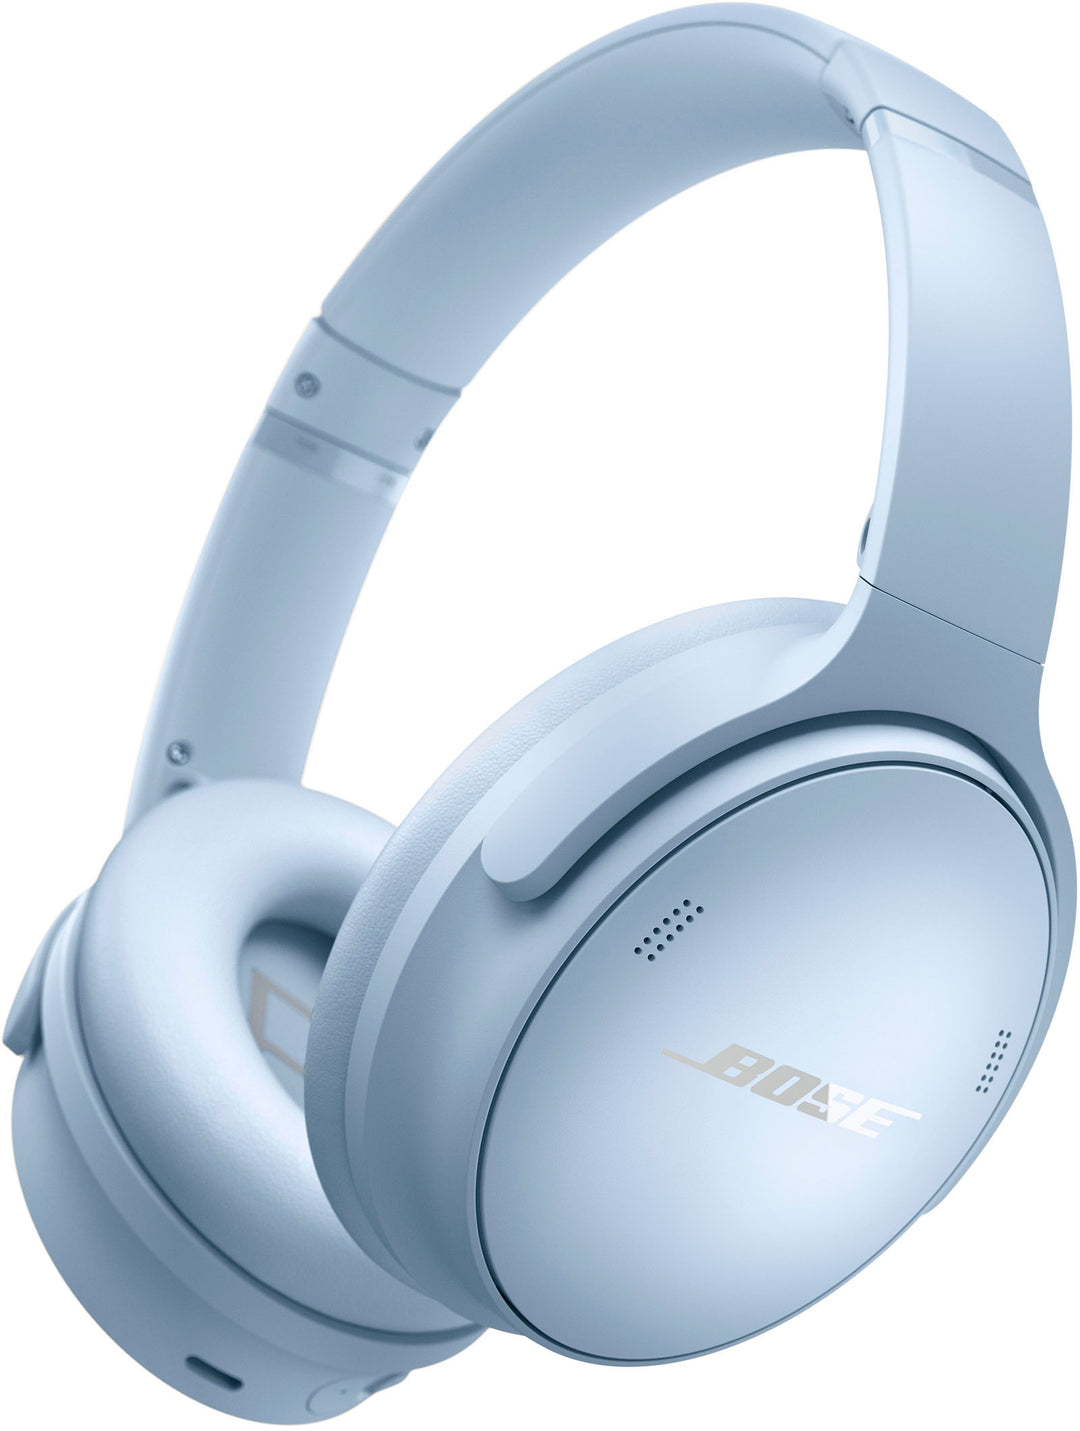 Bose - QuietComfort Wireless Noise Cancelling Over-the-Ear Headphones - Moonstone Blue_2